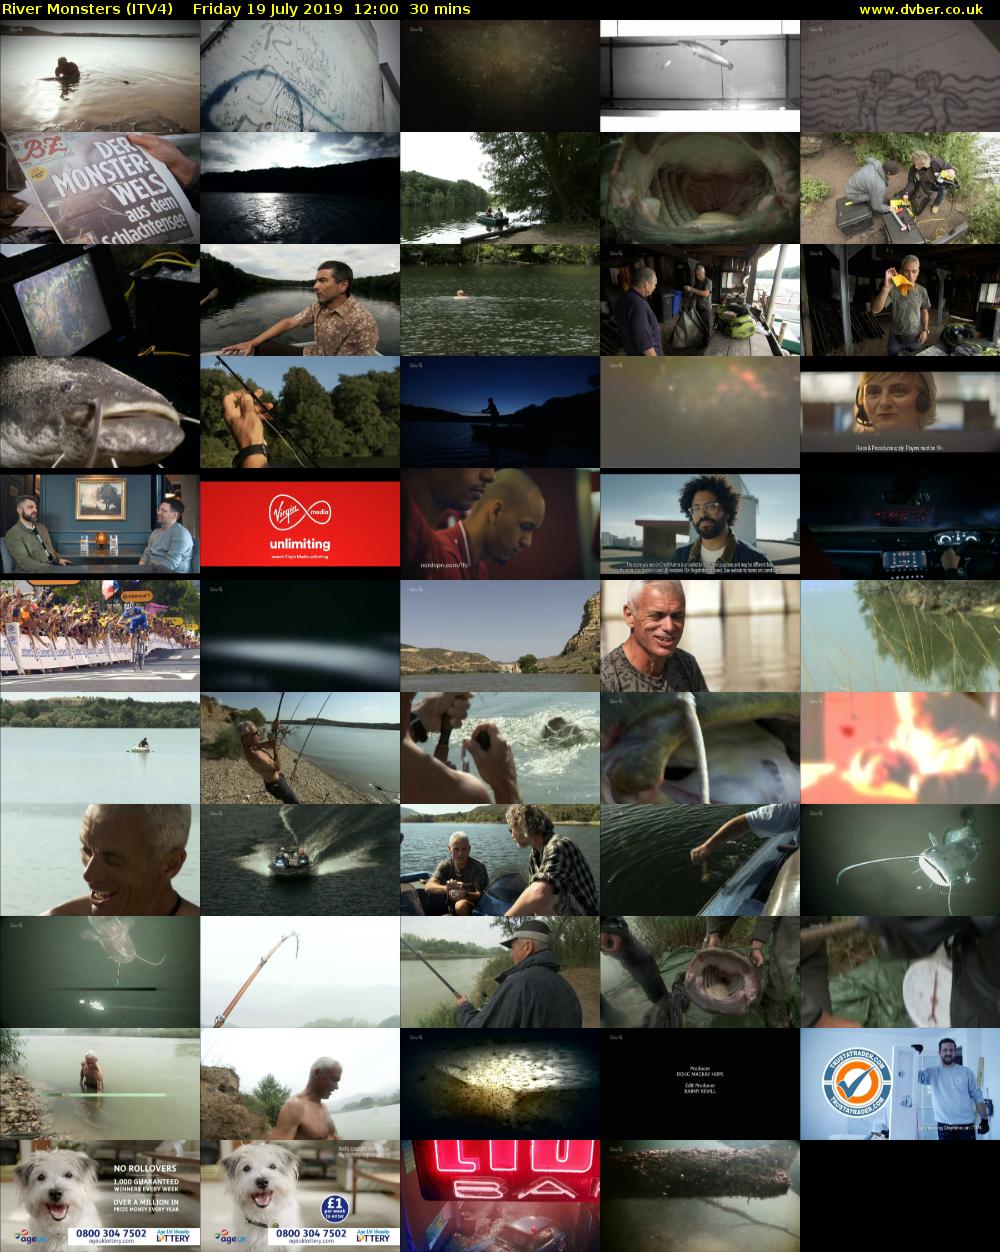 River Monsters (ITV4) Friday 19 July 2019 12:00 - 12:30